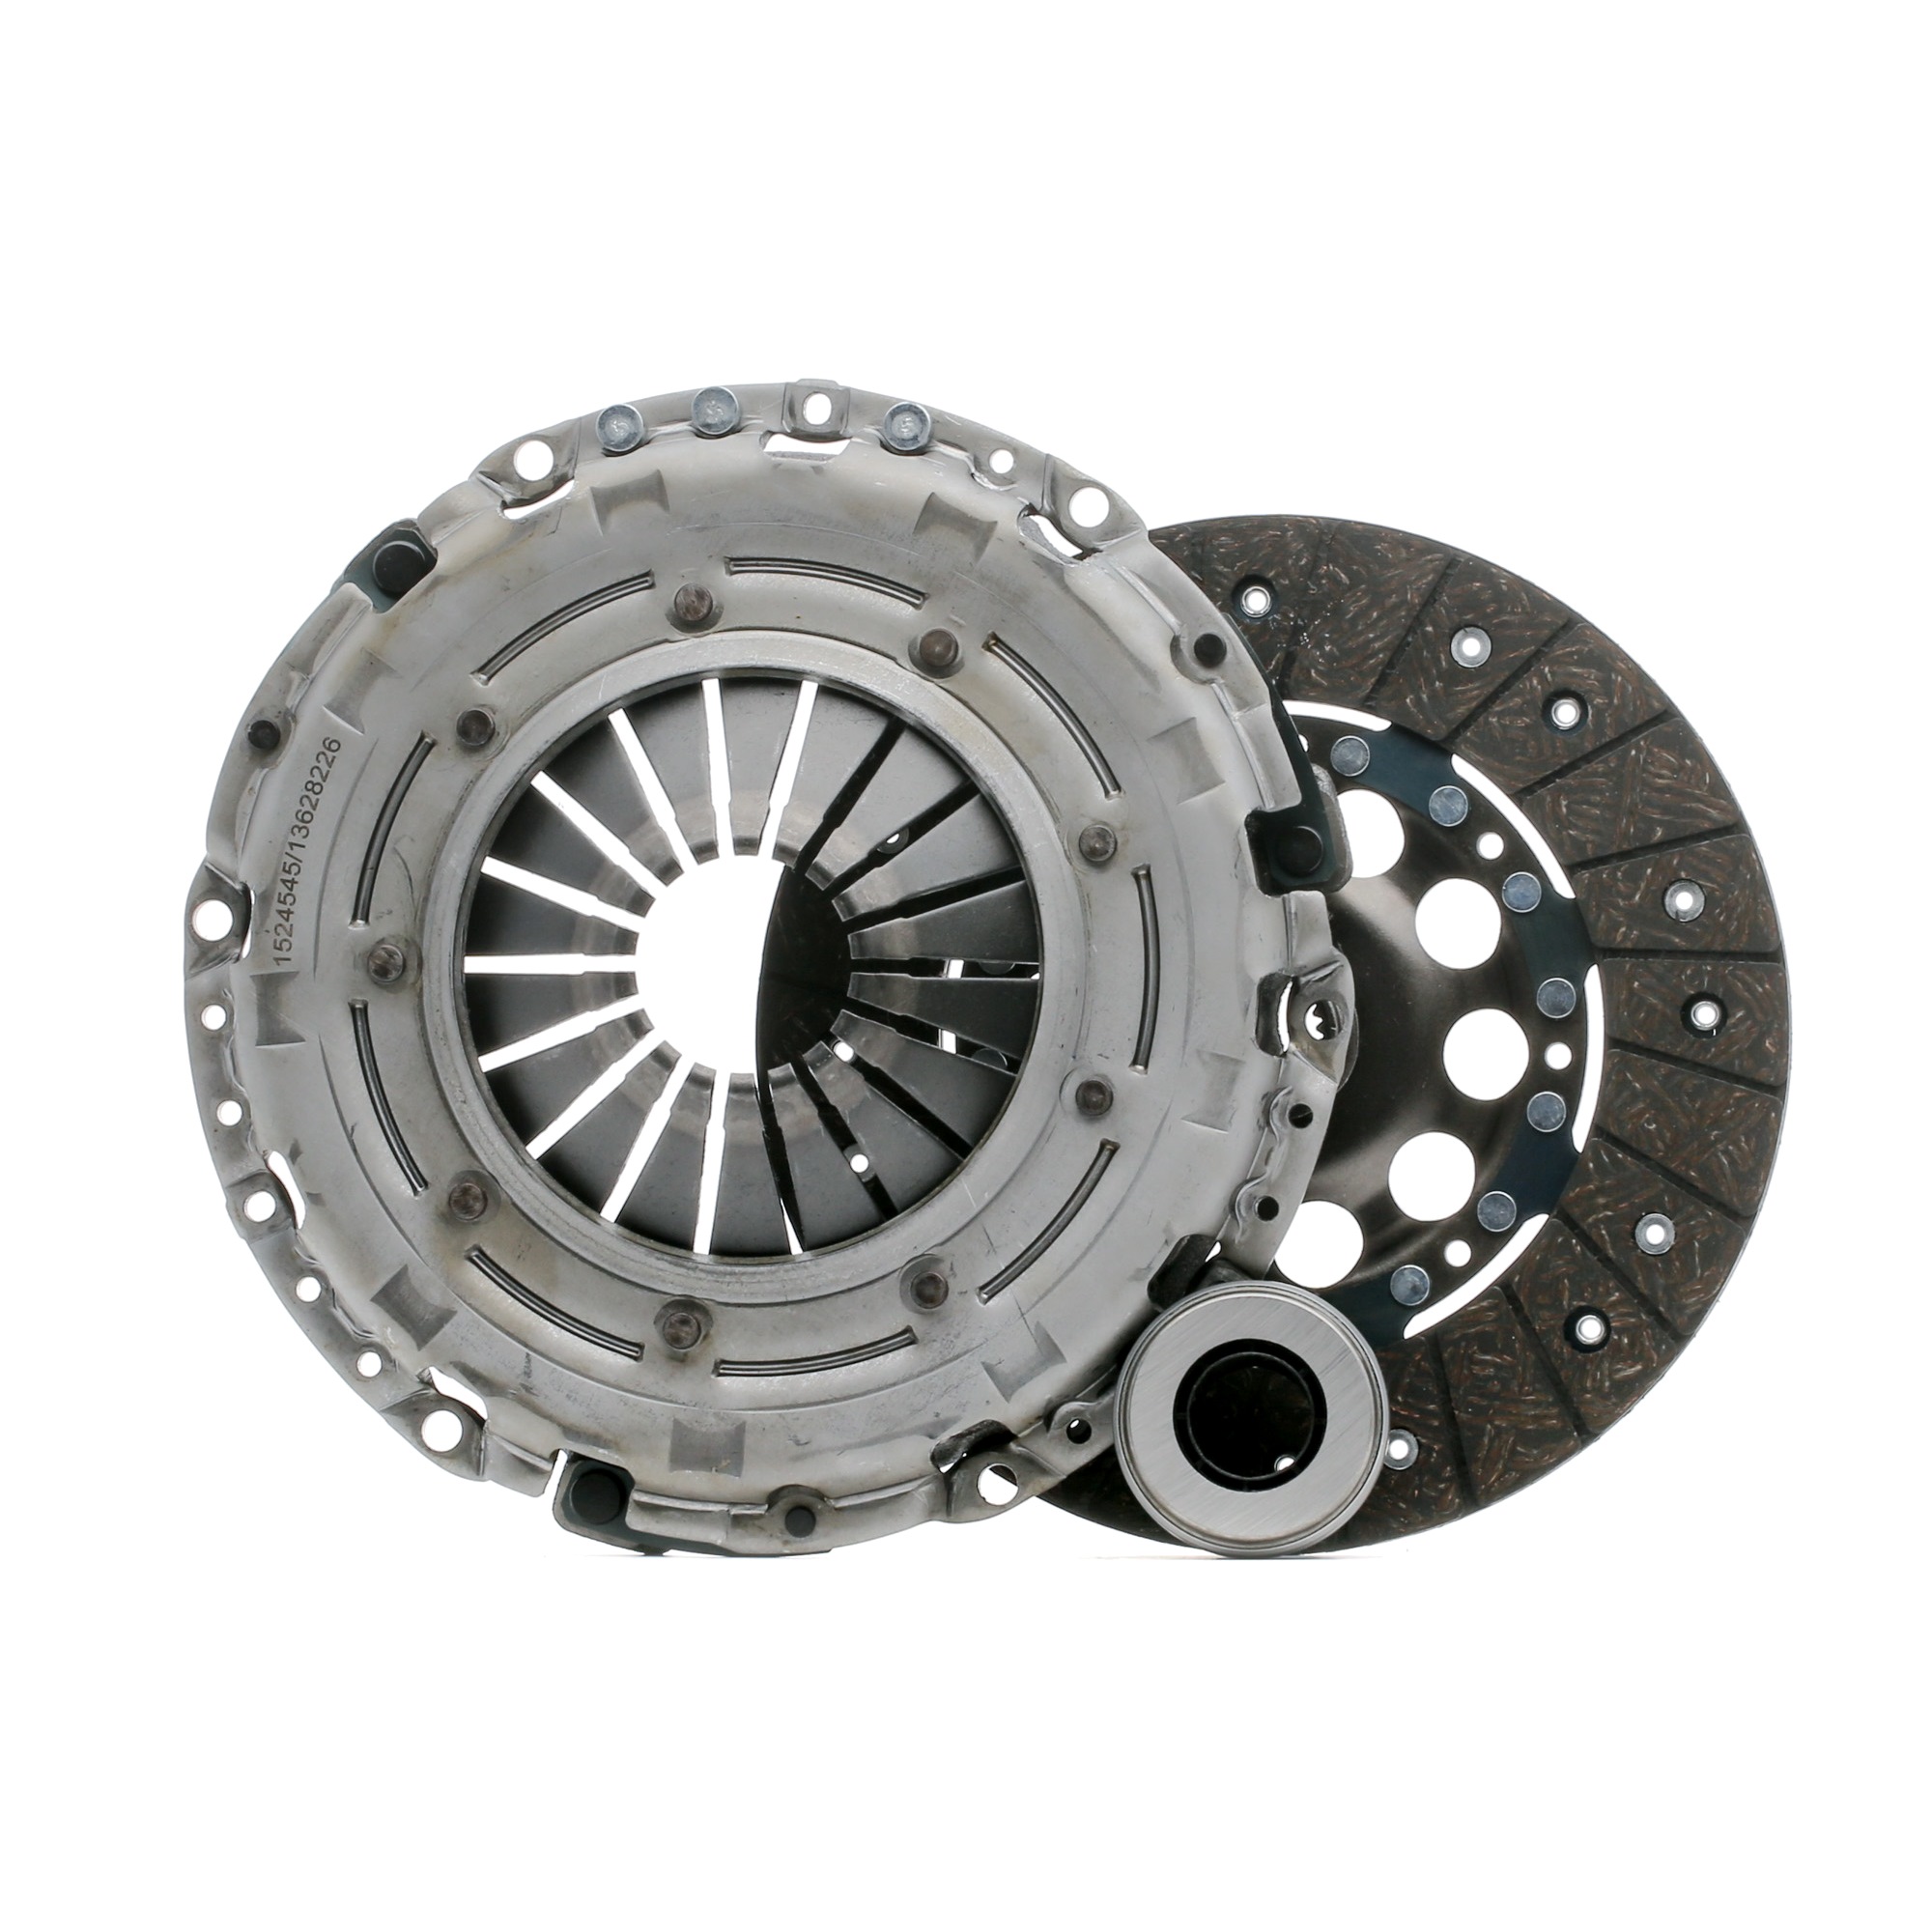 RIDEX 479C0162 Clutch kit for engines with dual-mass flywheel, three-piece, with clutch pressure plate, with clutch disc, with clutch release bearing, 236mm